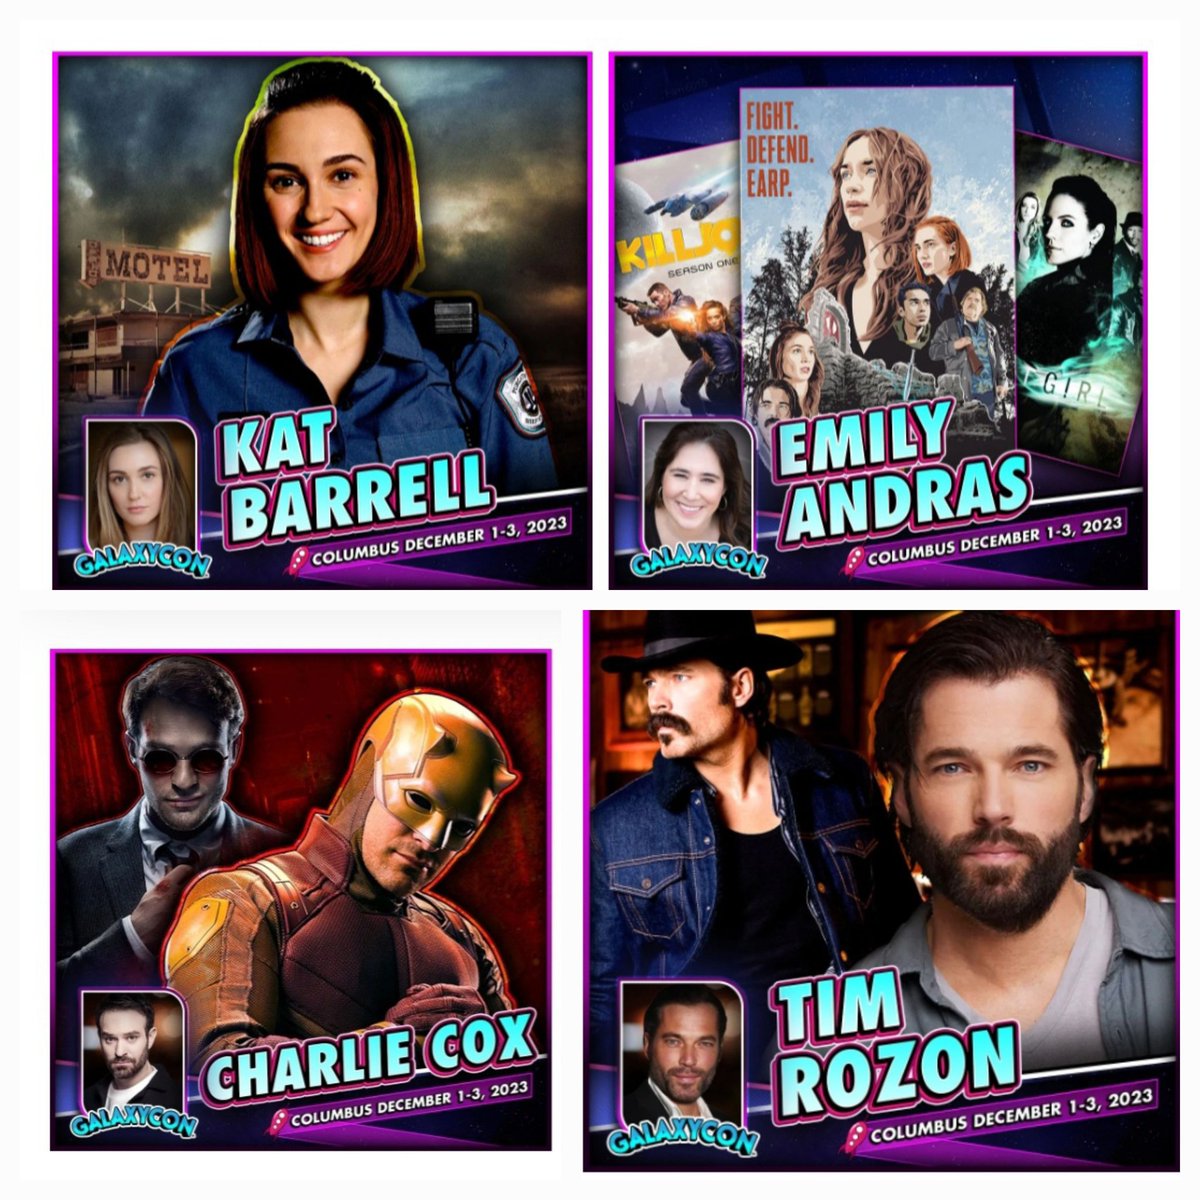 Ok, so we got a little #WynonnaEarp reunion but also the amazing Charlie Cox coming to #GalaxyConColumbus Dec 1-3 2023....I think I'm making planny plans 😏